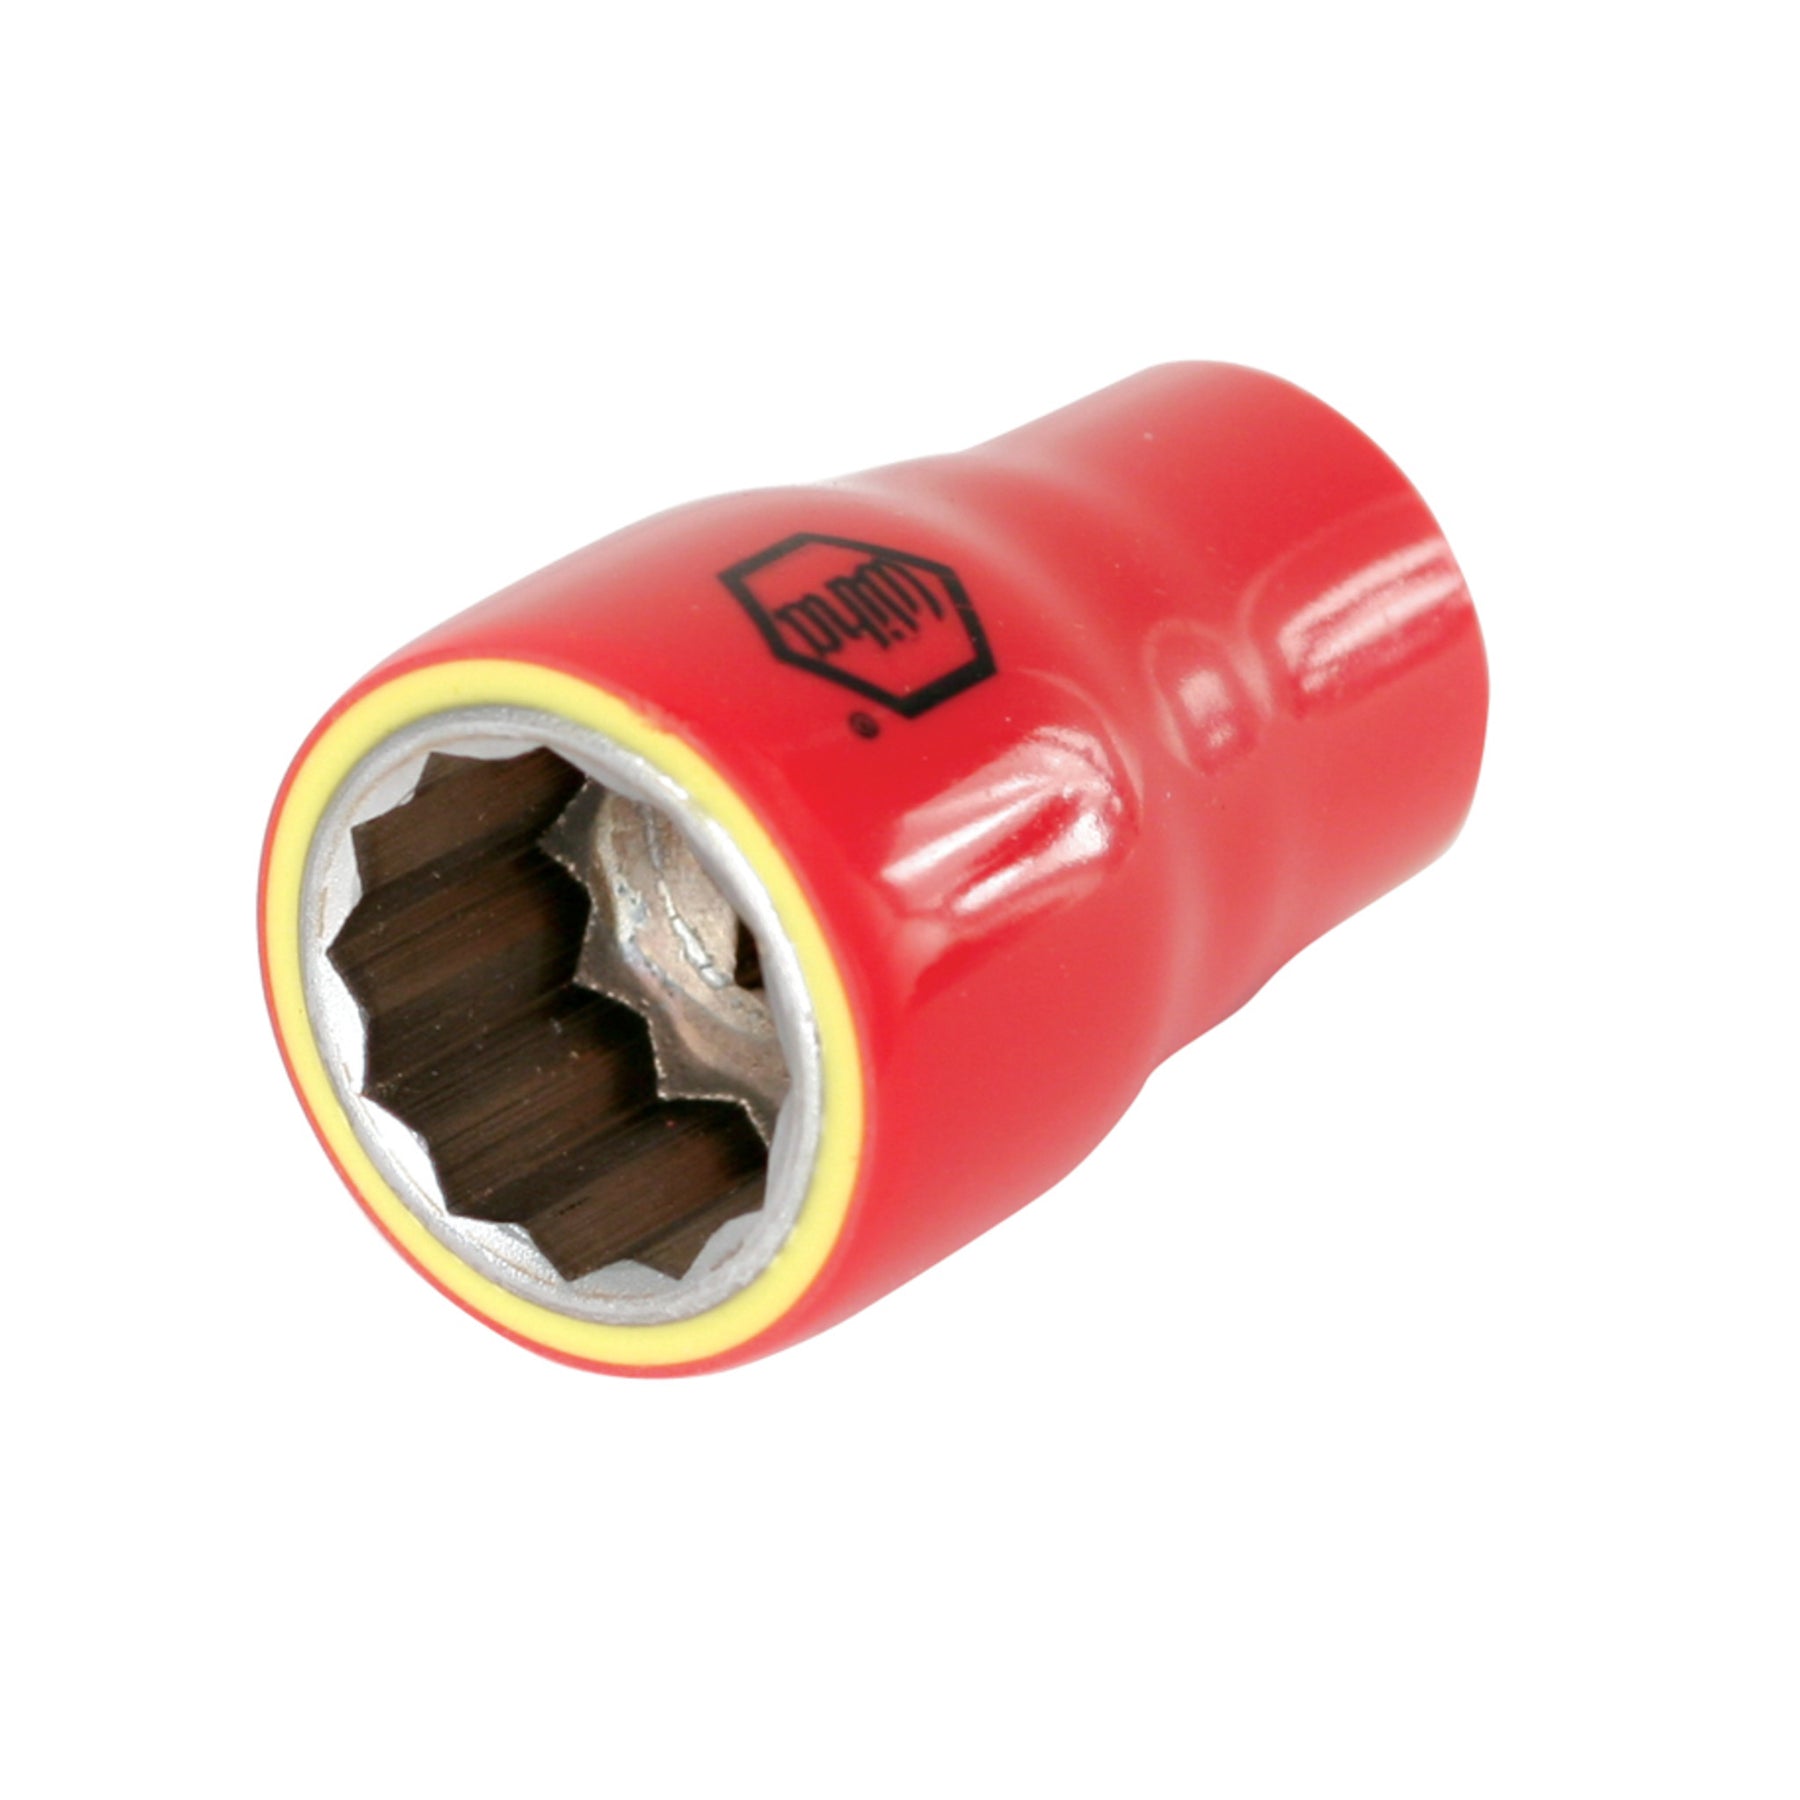 Insulated Socket 1/2" Drive 28mm